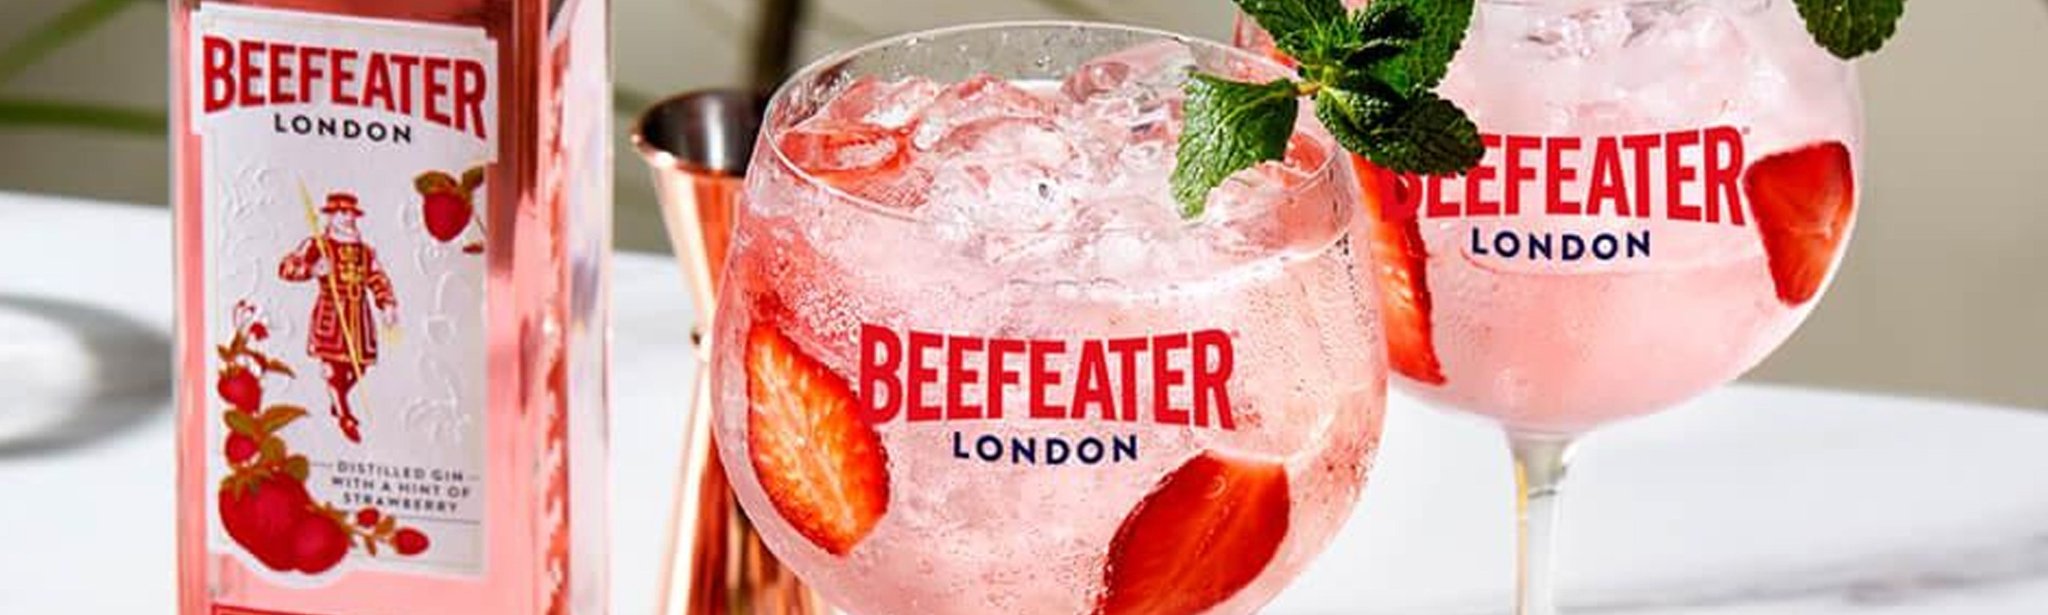 Beefeater - The Bottle Club